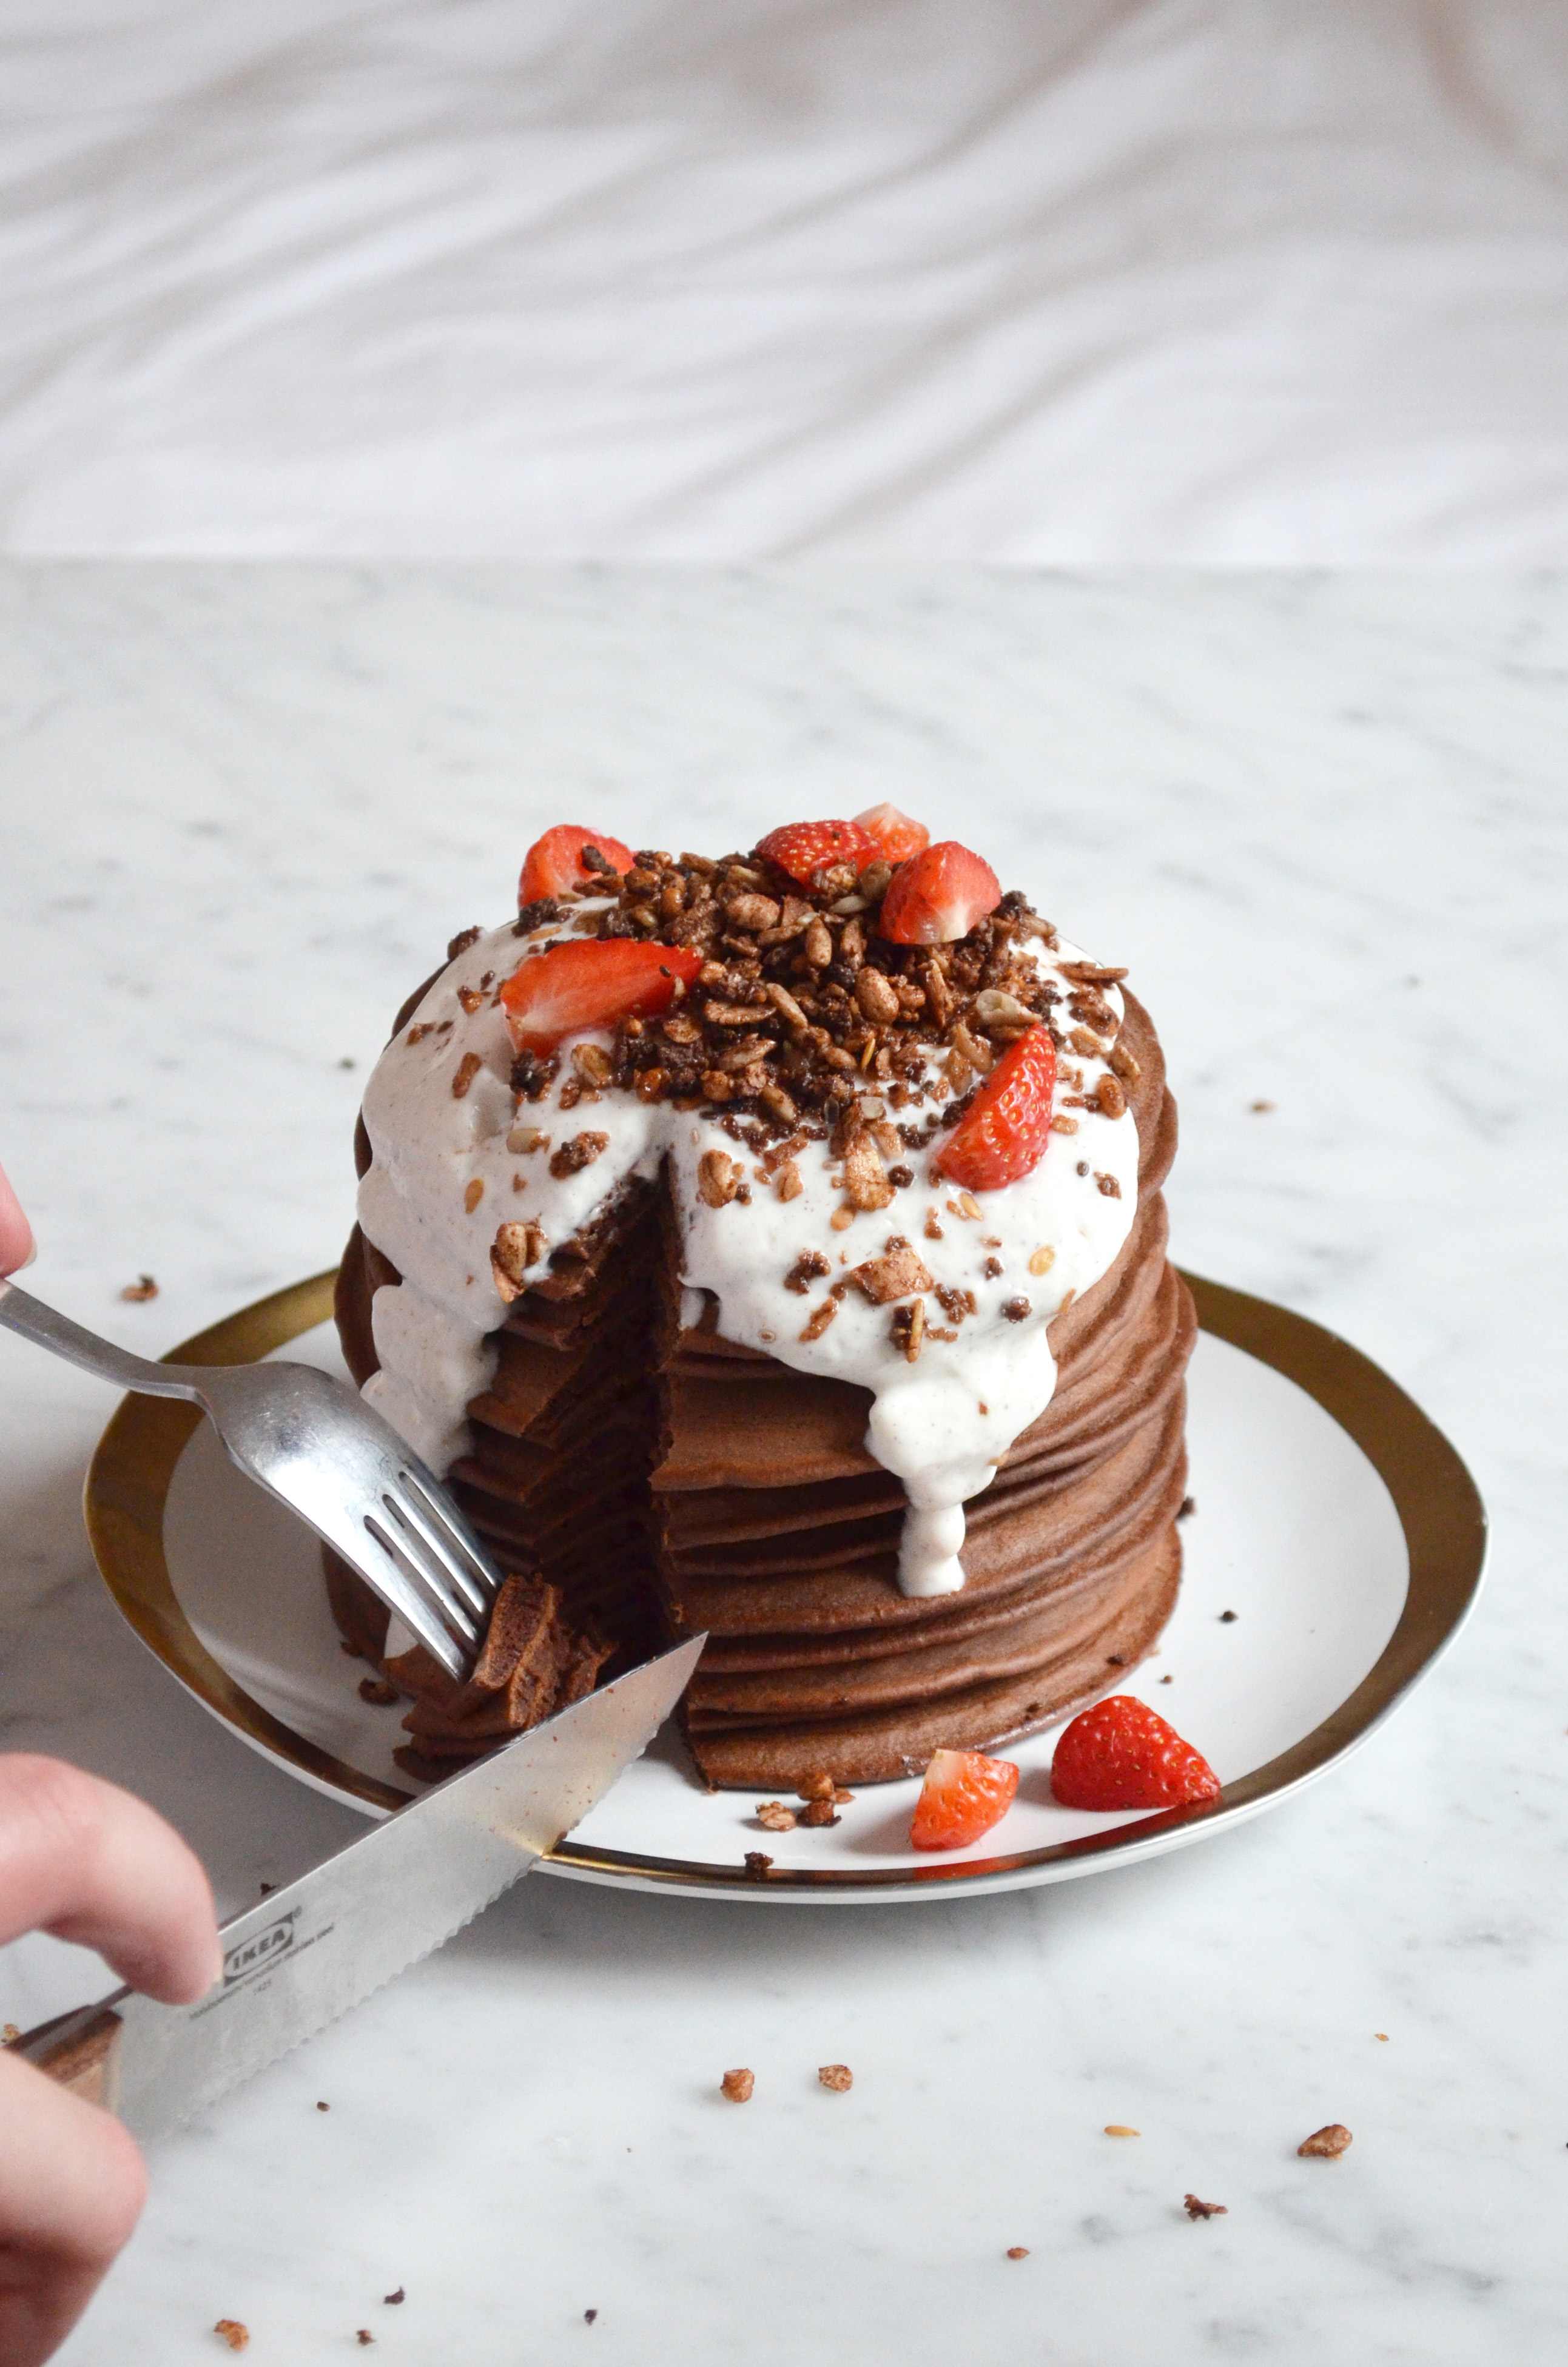 A recipe for chocolate pancakes topped with a greek yoghurt vanilla cream, fresh strawberries and chocolate granola